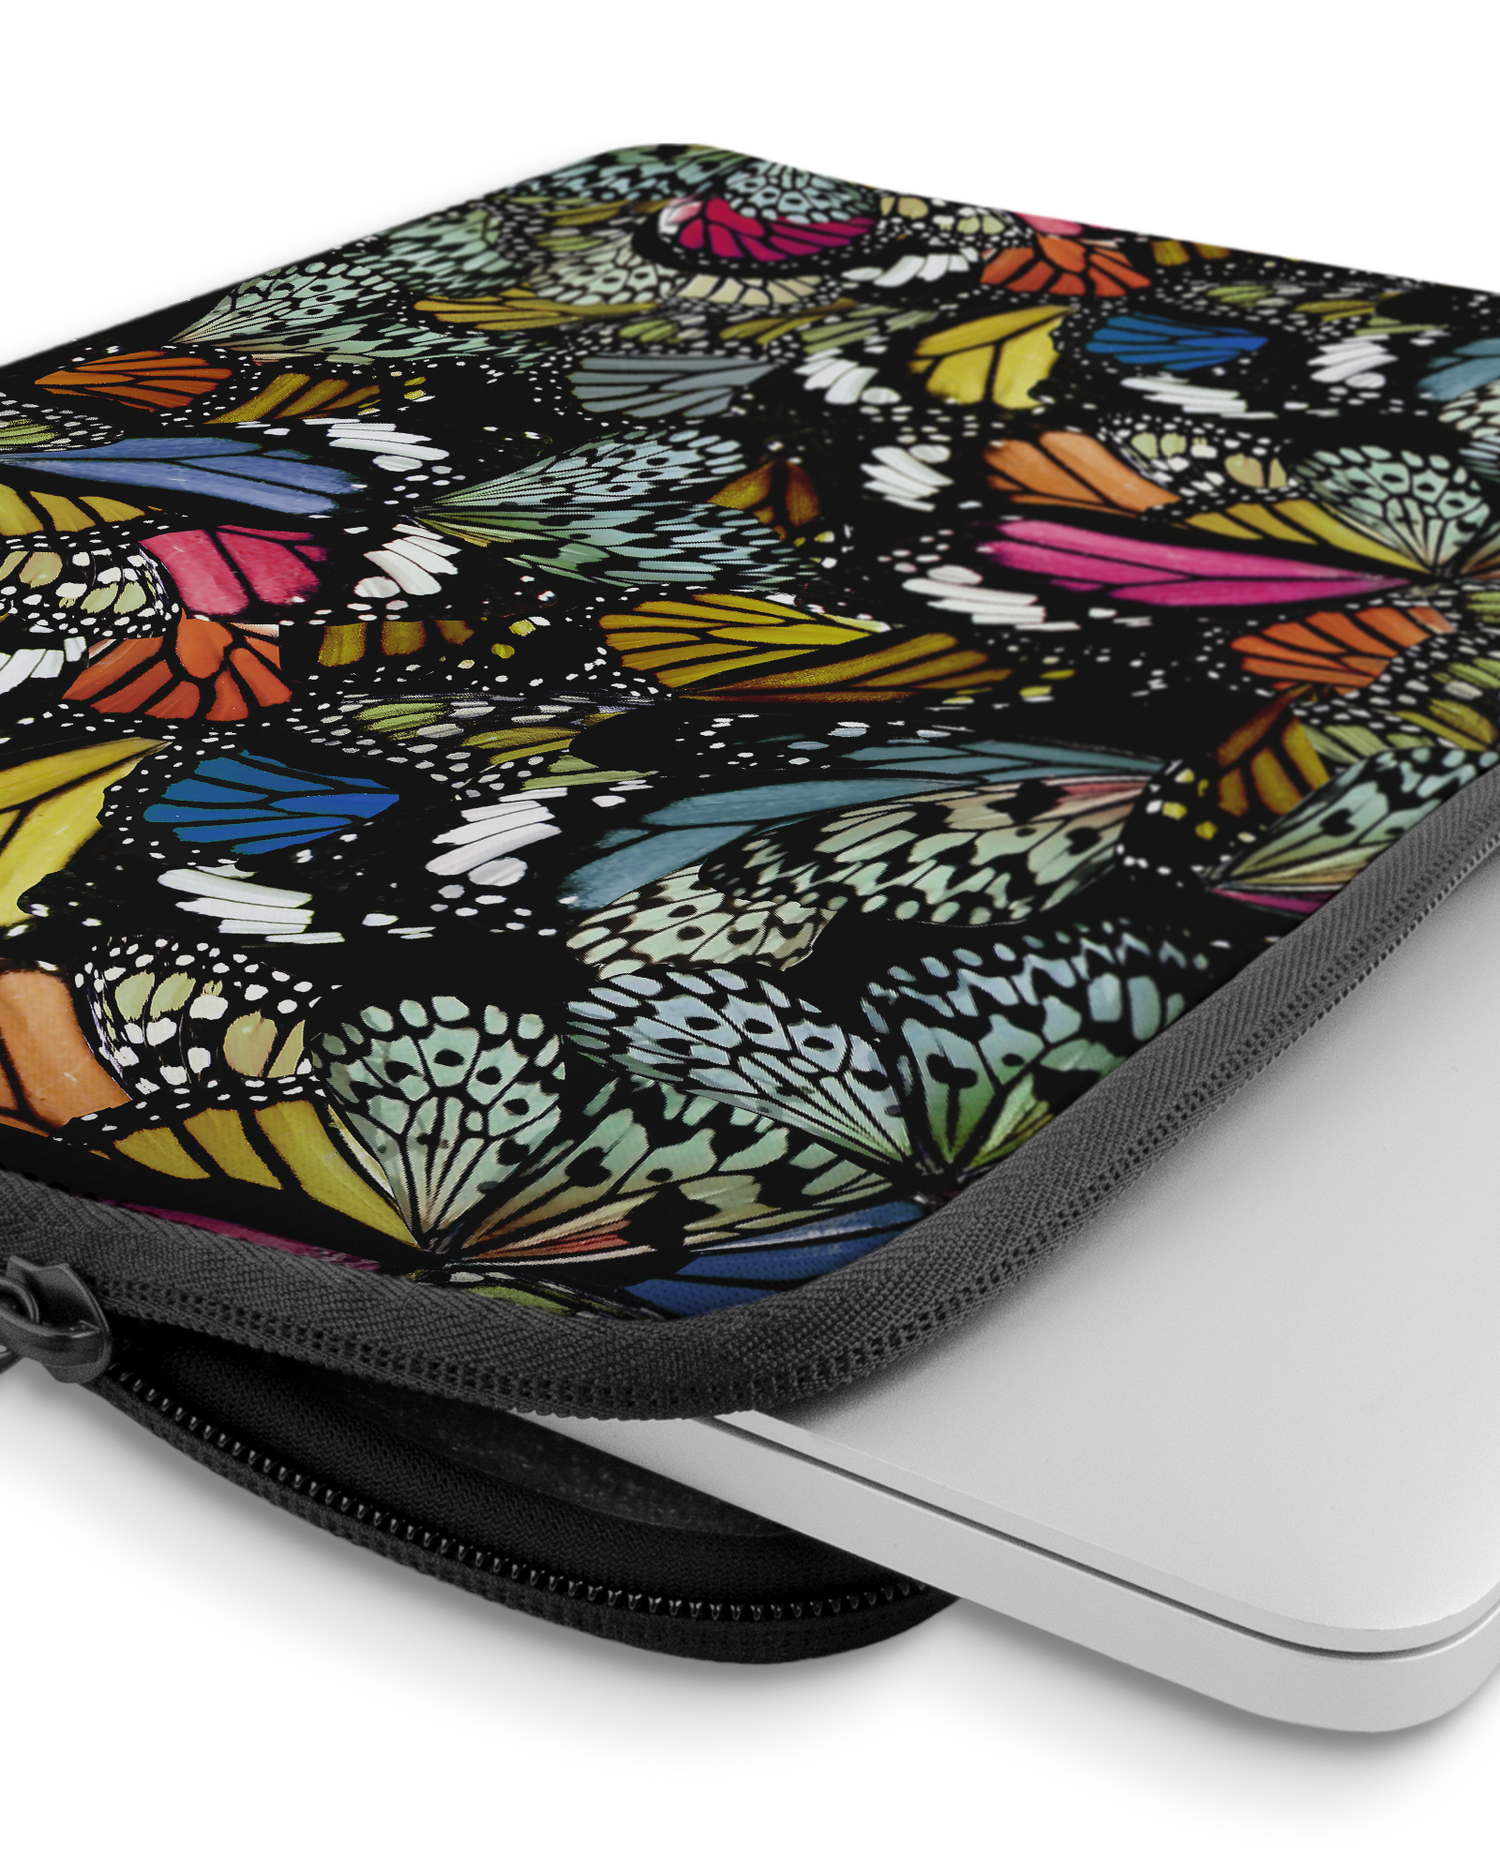 Psychedelic Butterflies Laptop Case 13-14 inch with device inside